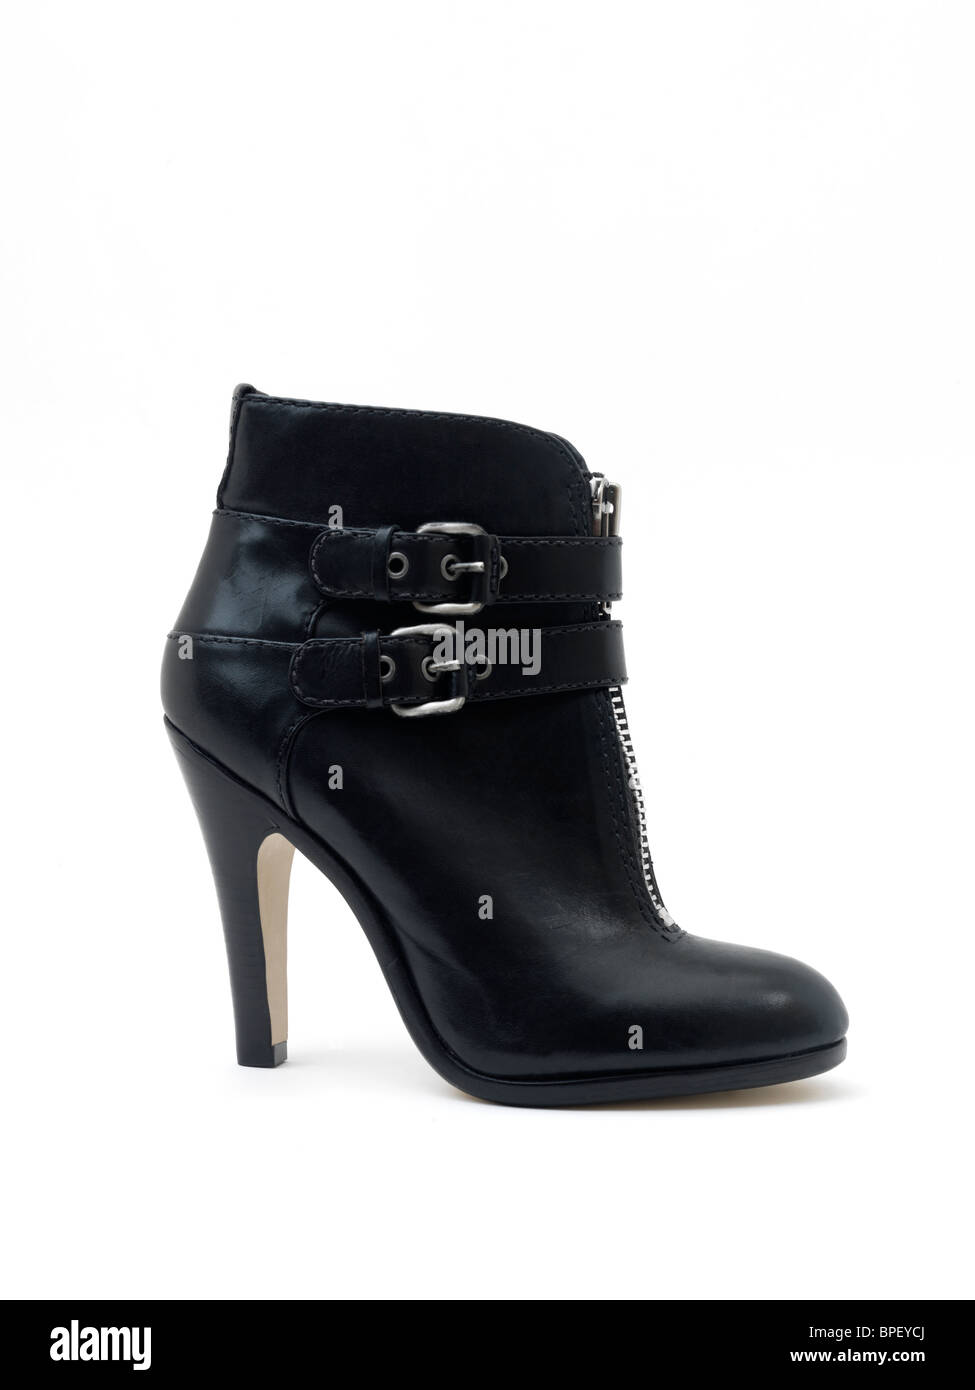 Ladies Black Leather High Heeled Stiletto Ankle Boot with Silver Buckles and Zip Stock Photo